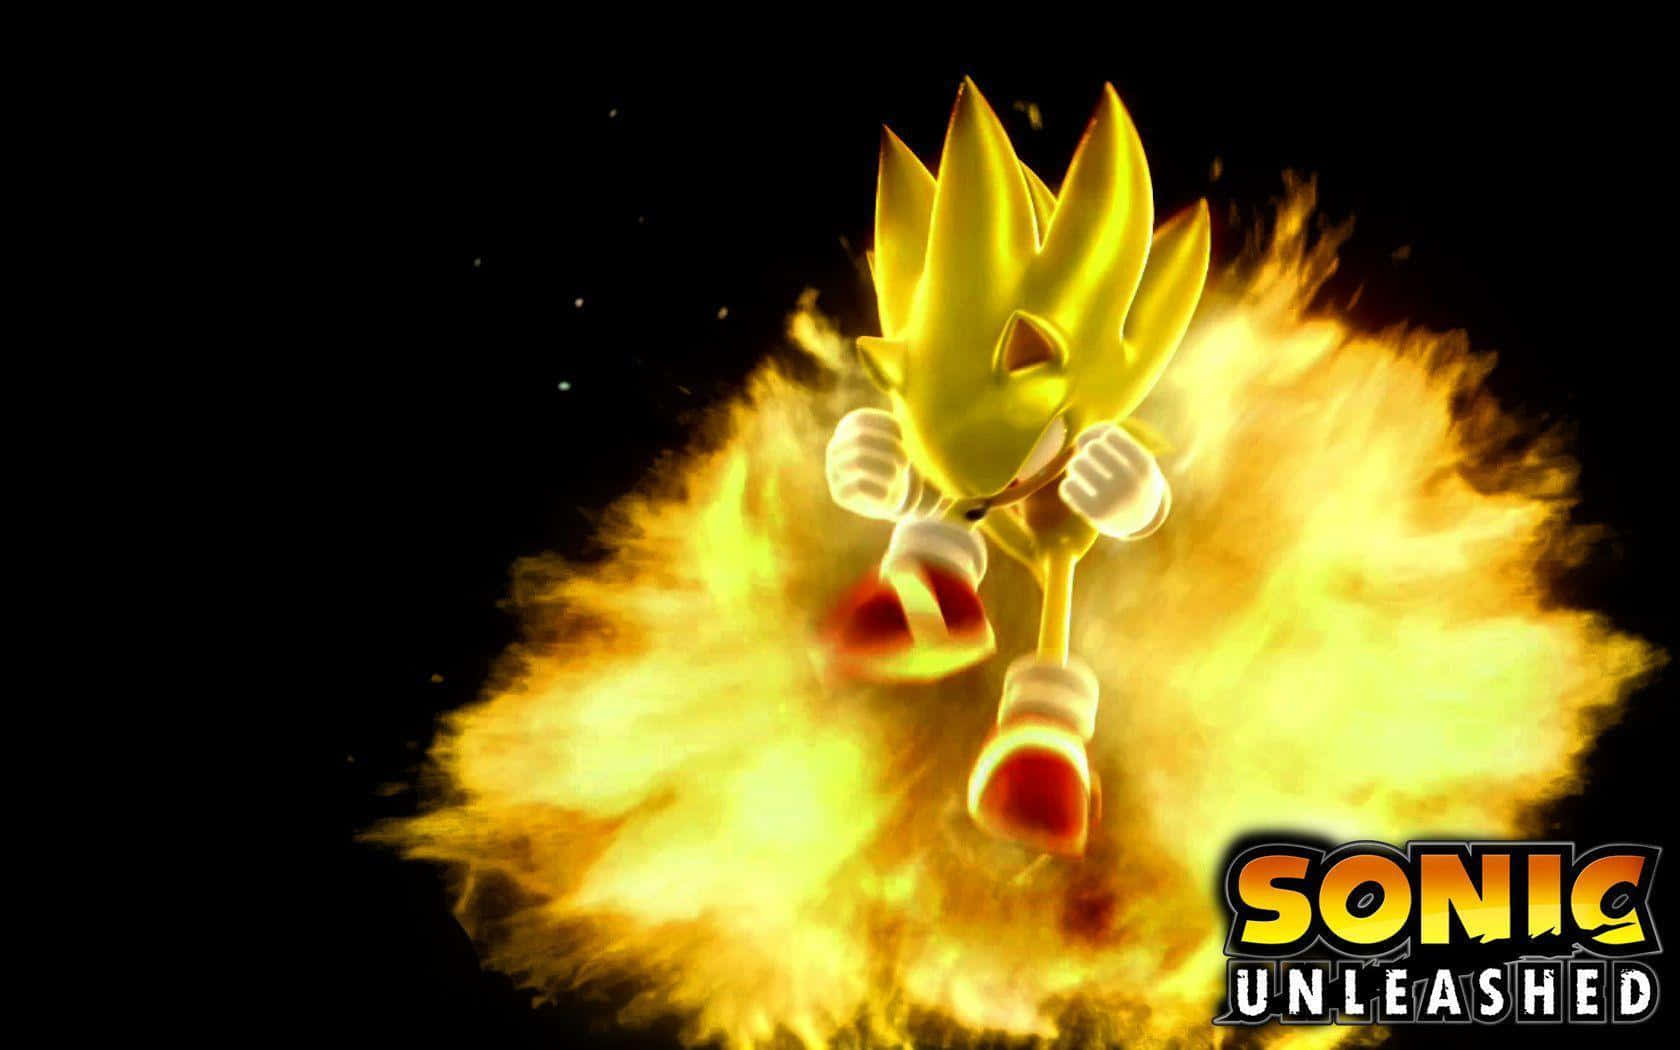 Adventure Awaits - Get Ready To Play As Super Sonic!